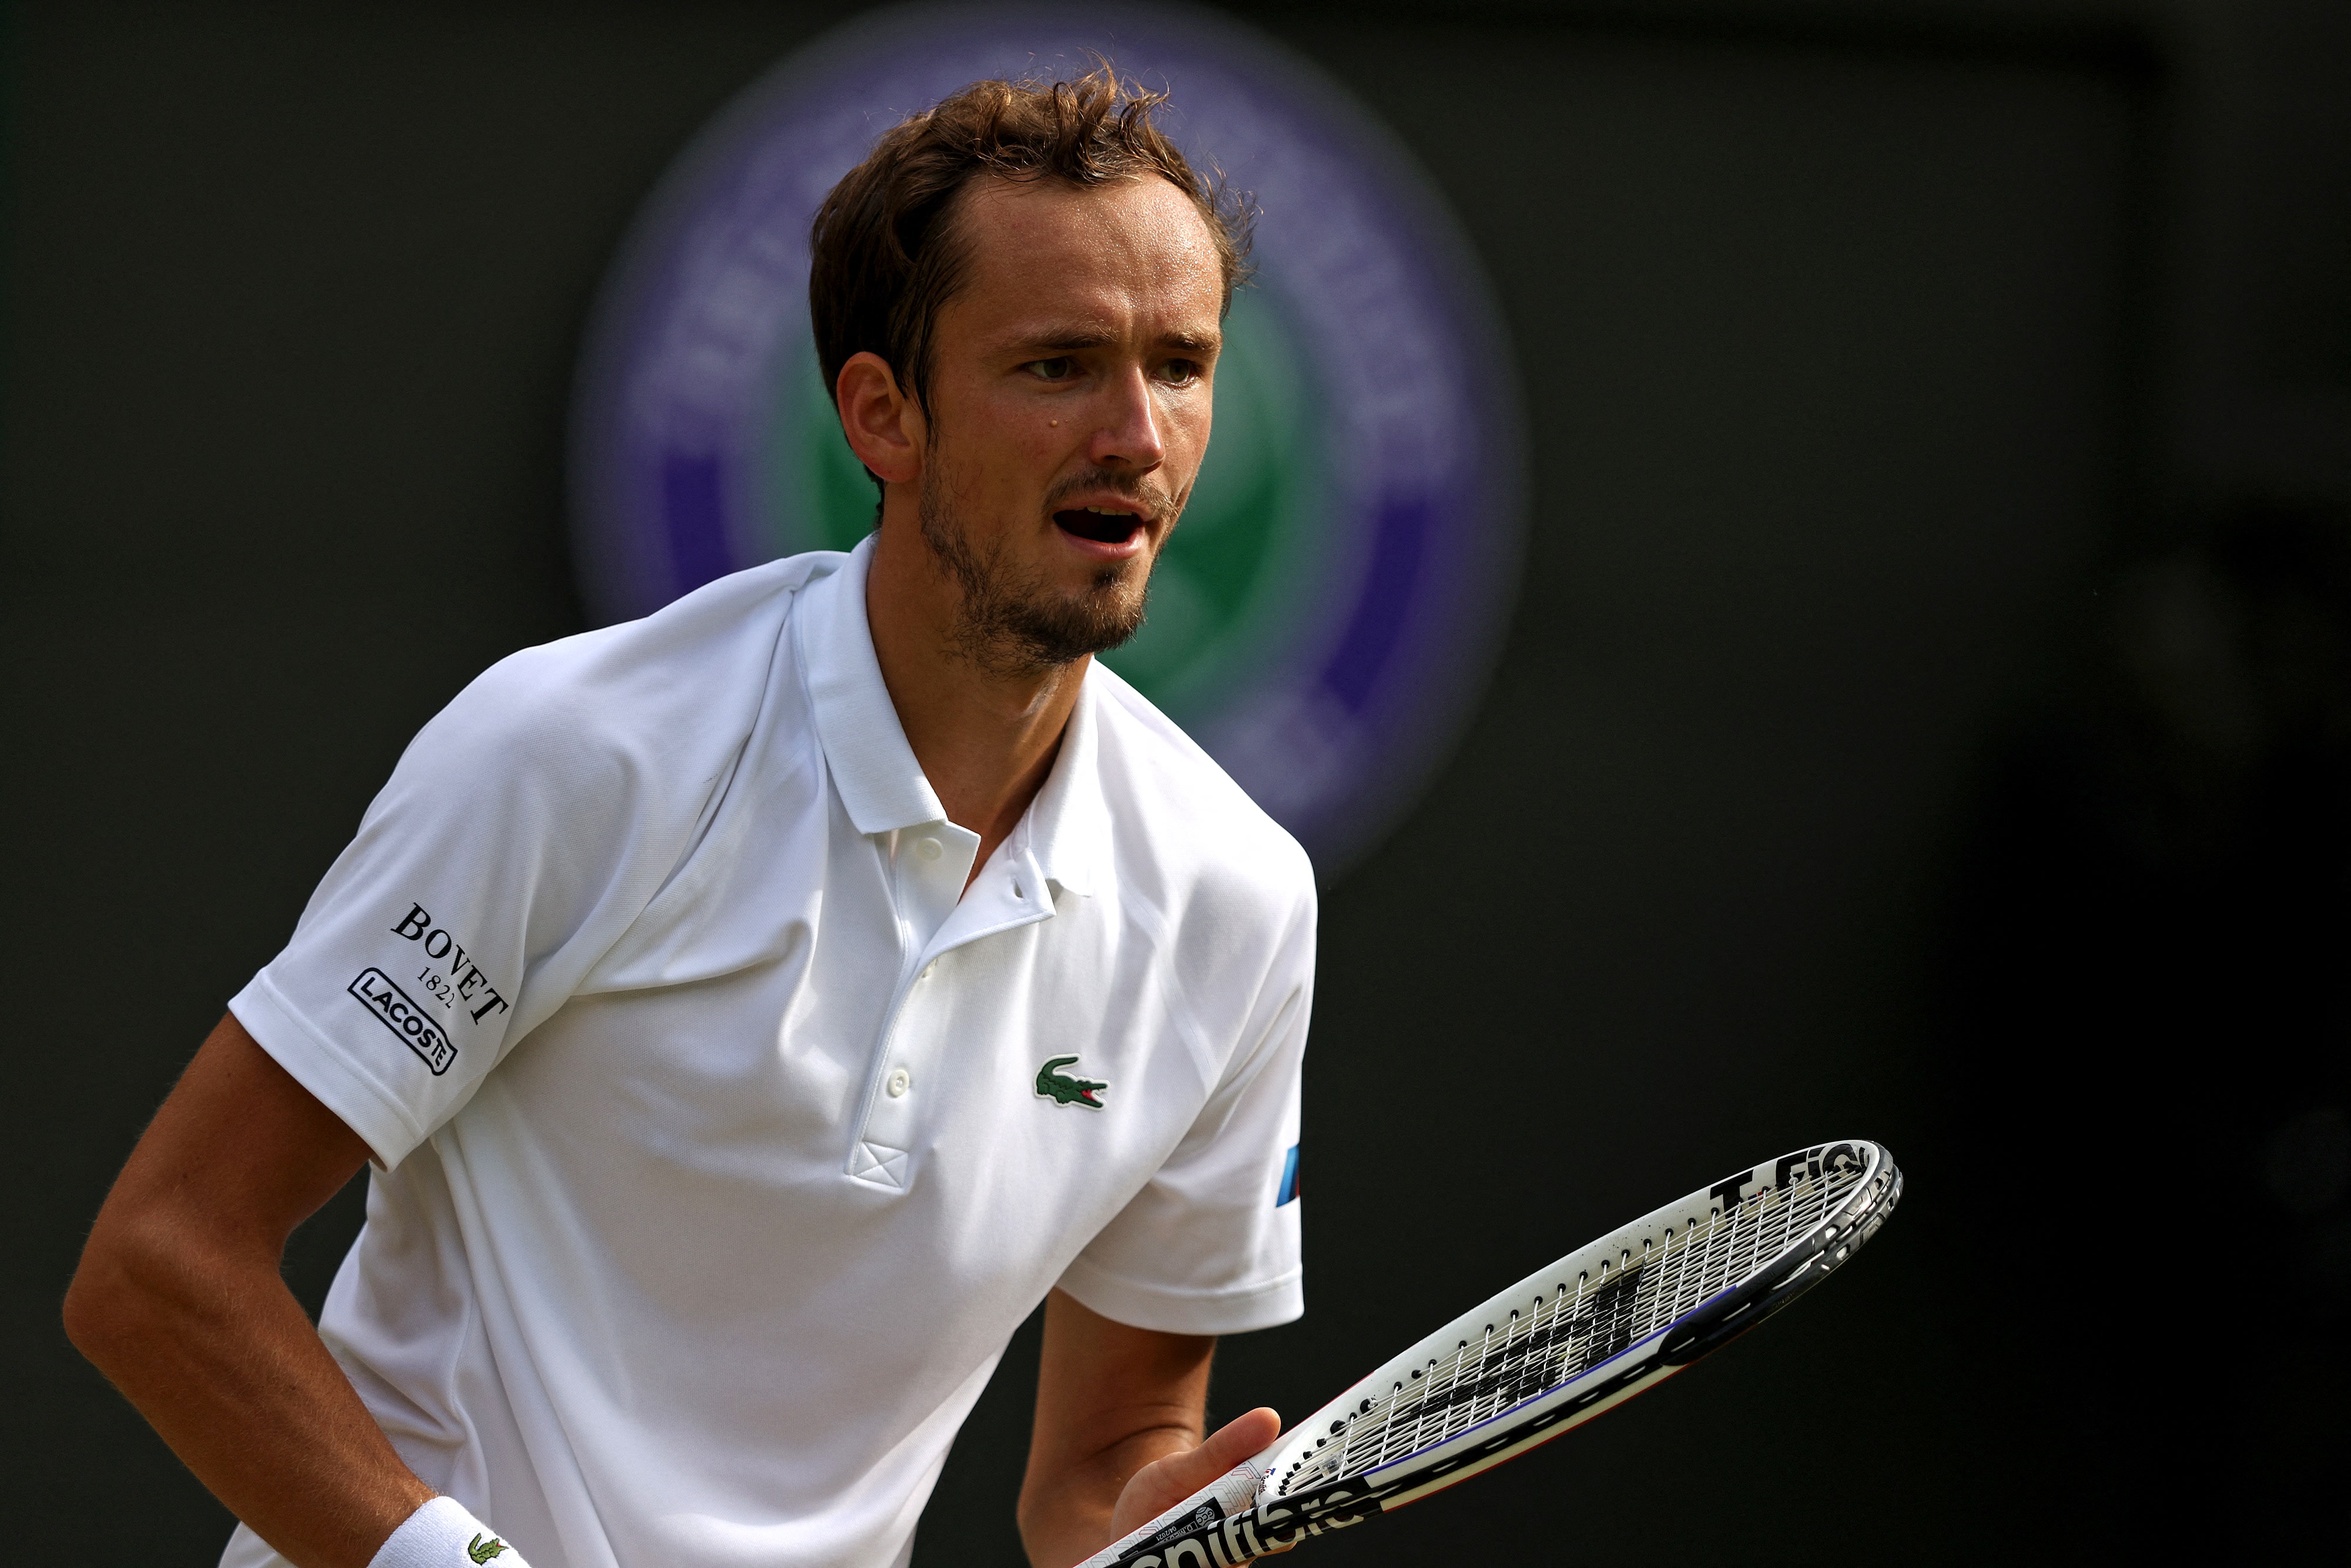 Wimbledon bans Russian and Belarusian tennis players in response to Ukraine invasion